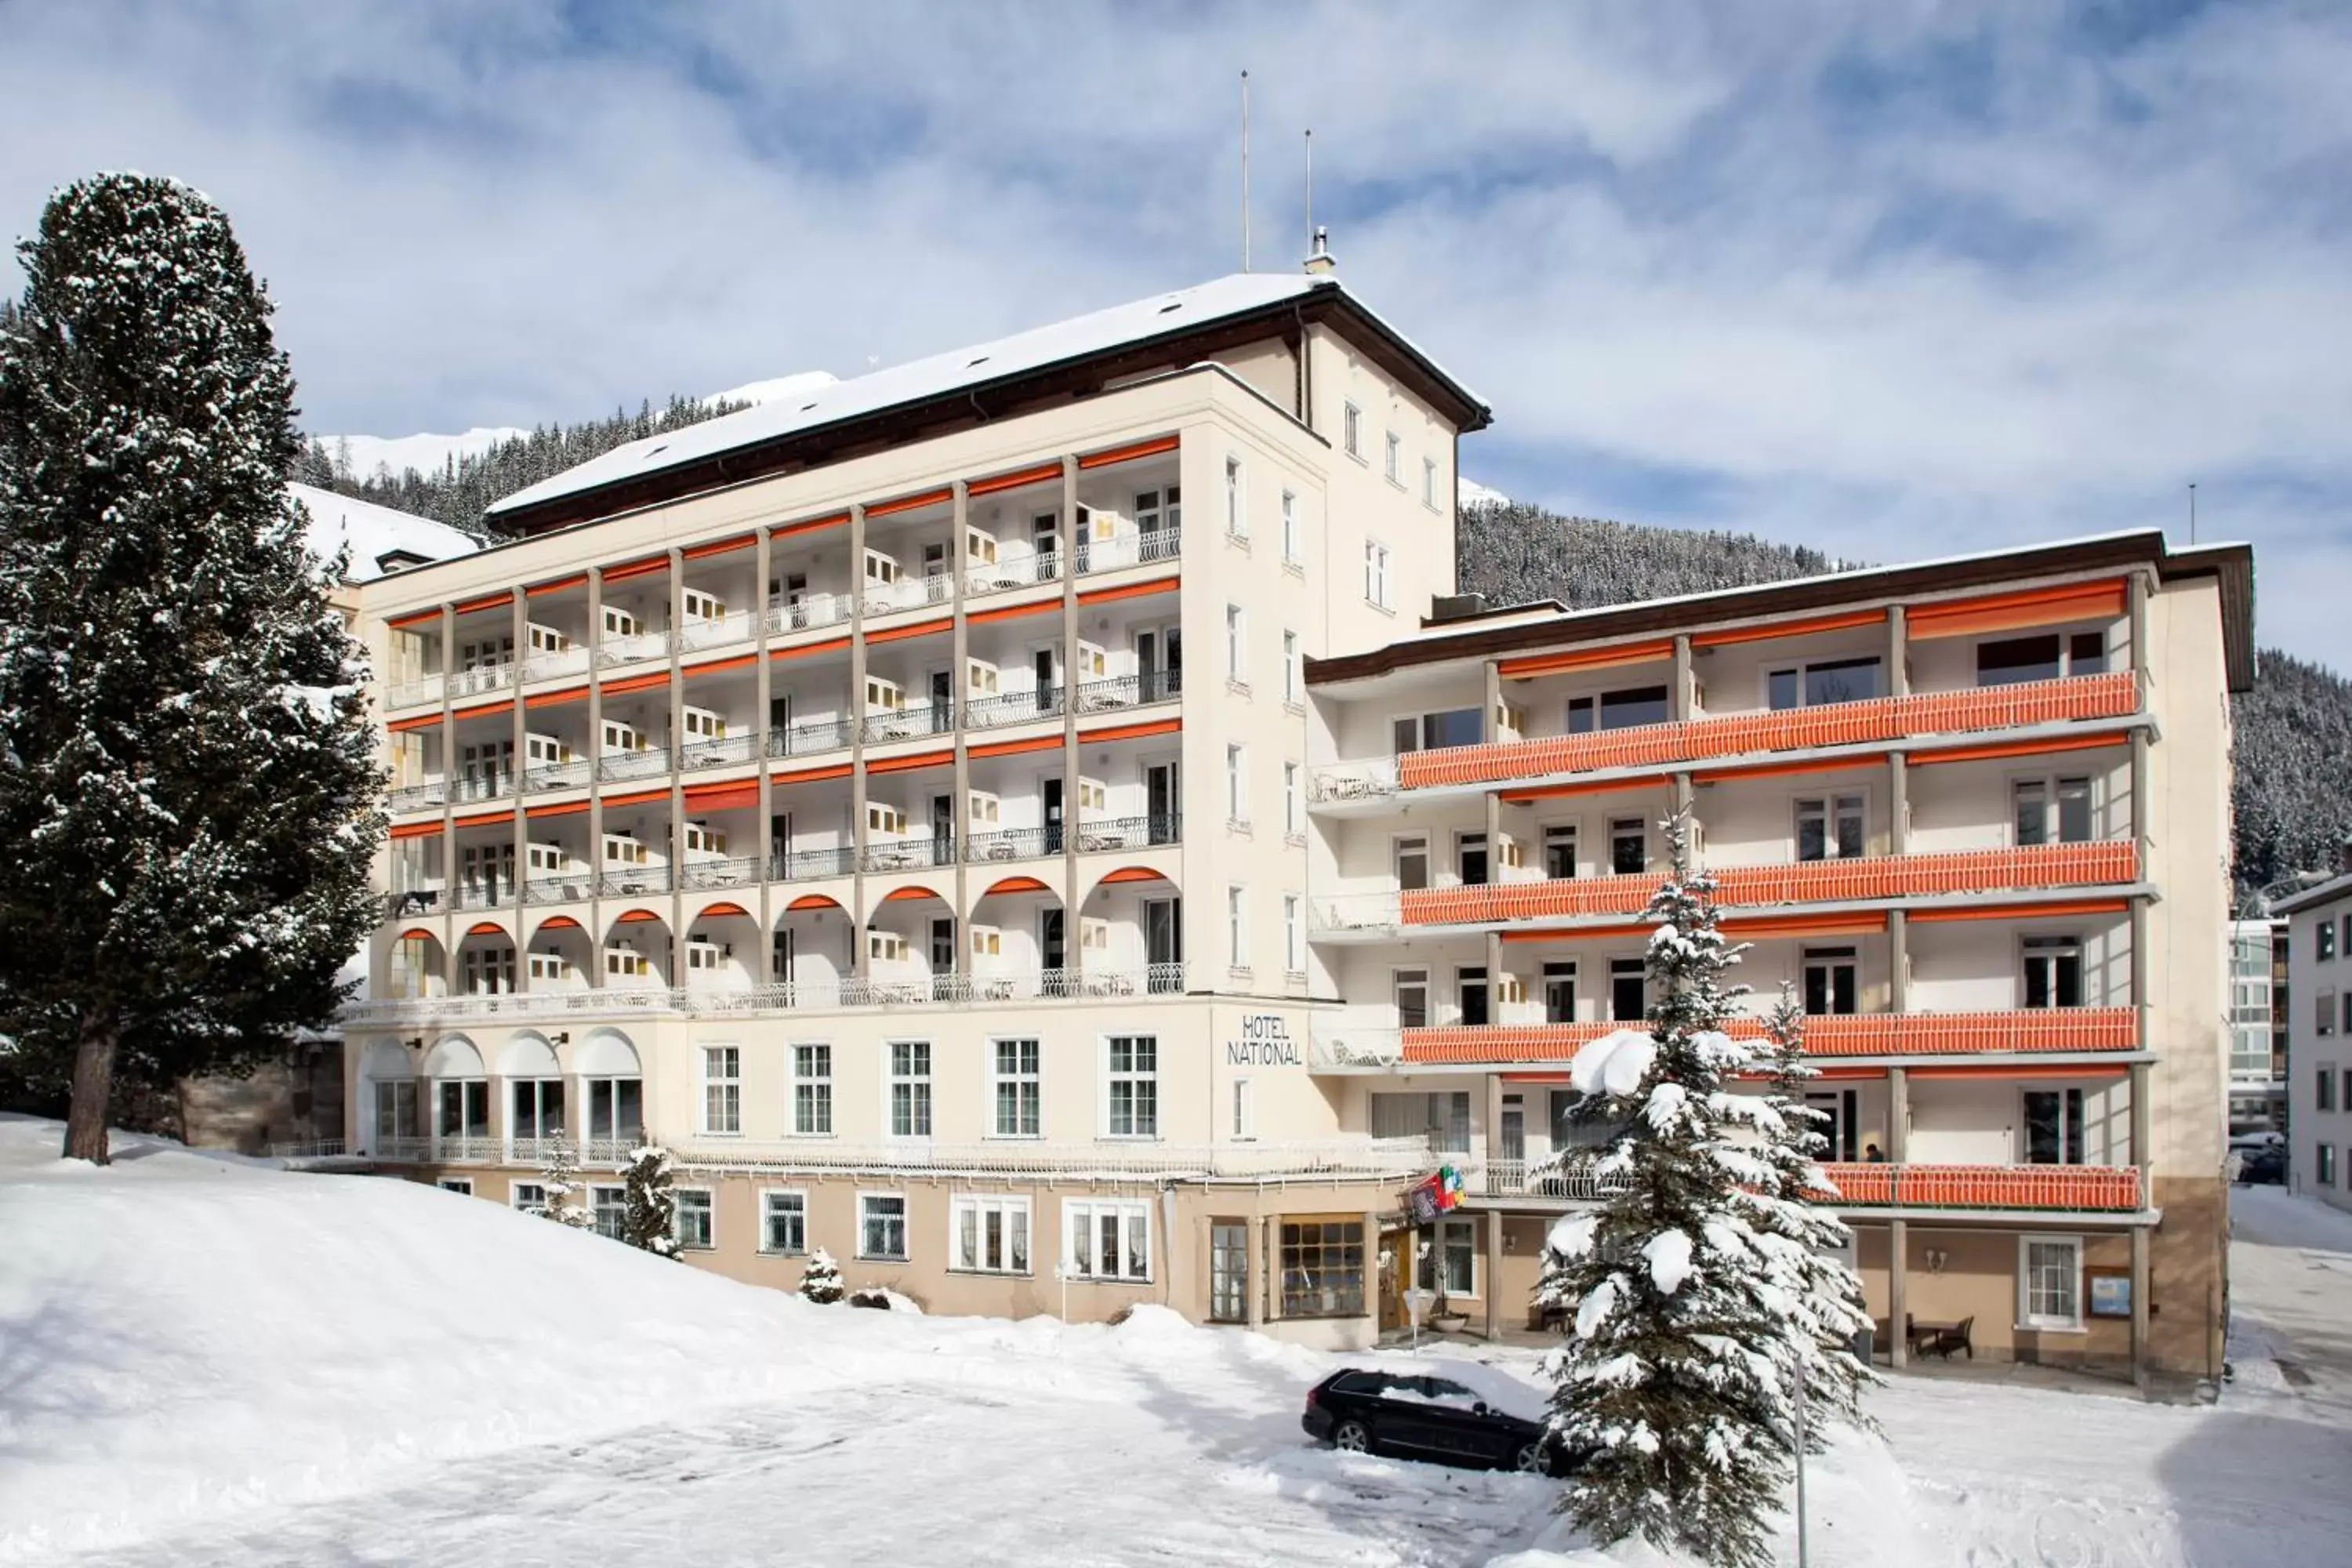 Property building, Winter in Hotel National